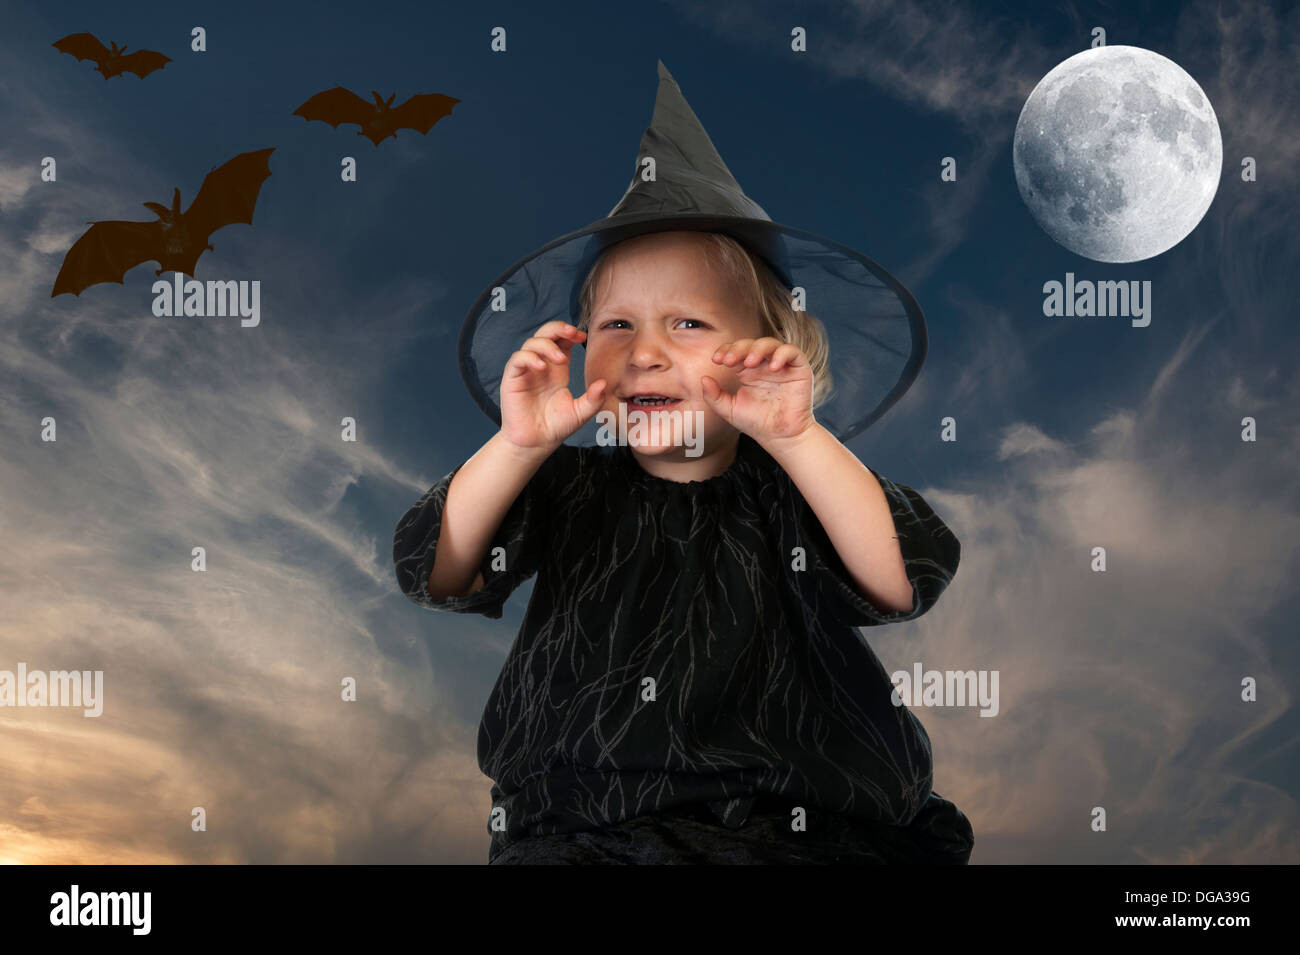 little halloween witch, night backgound with moon and bats Stock Photo